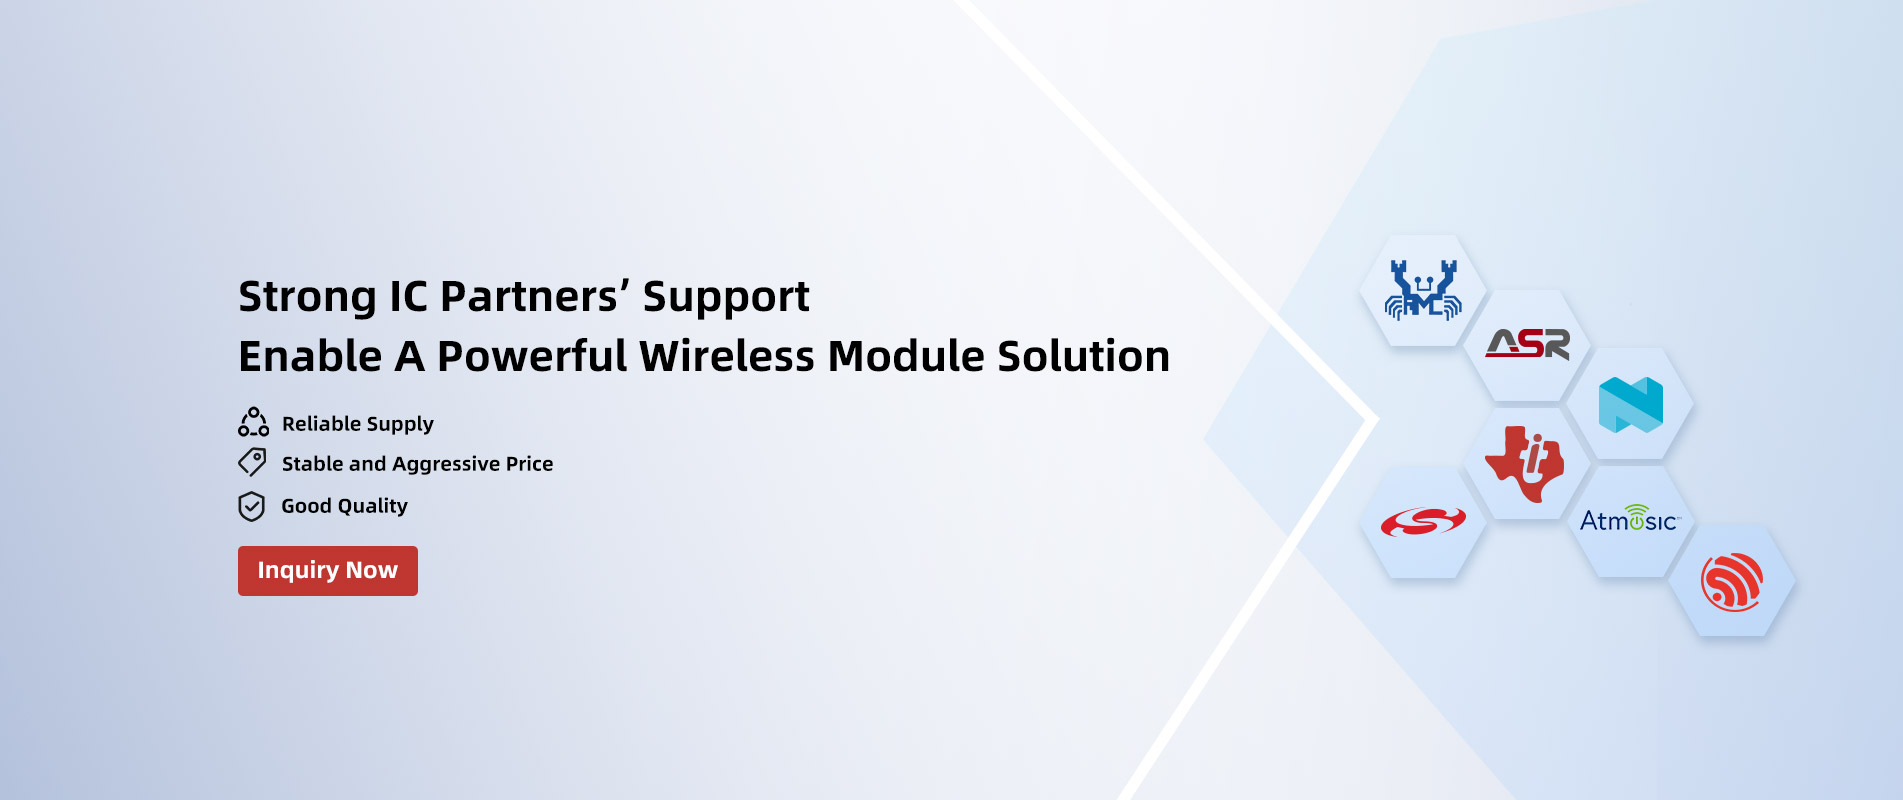 Strong IC Partners' Support Enable A Powerful Wireless Module Solution